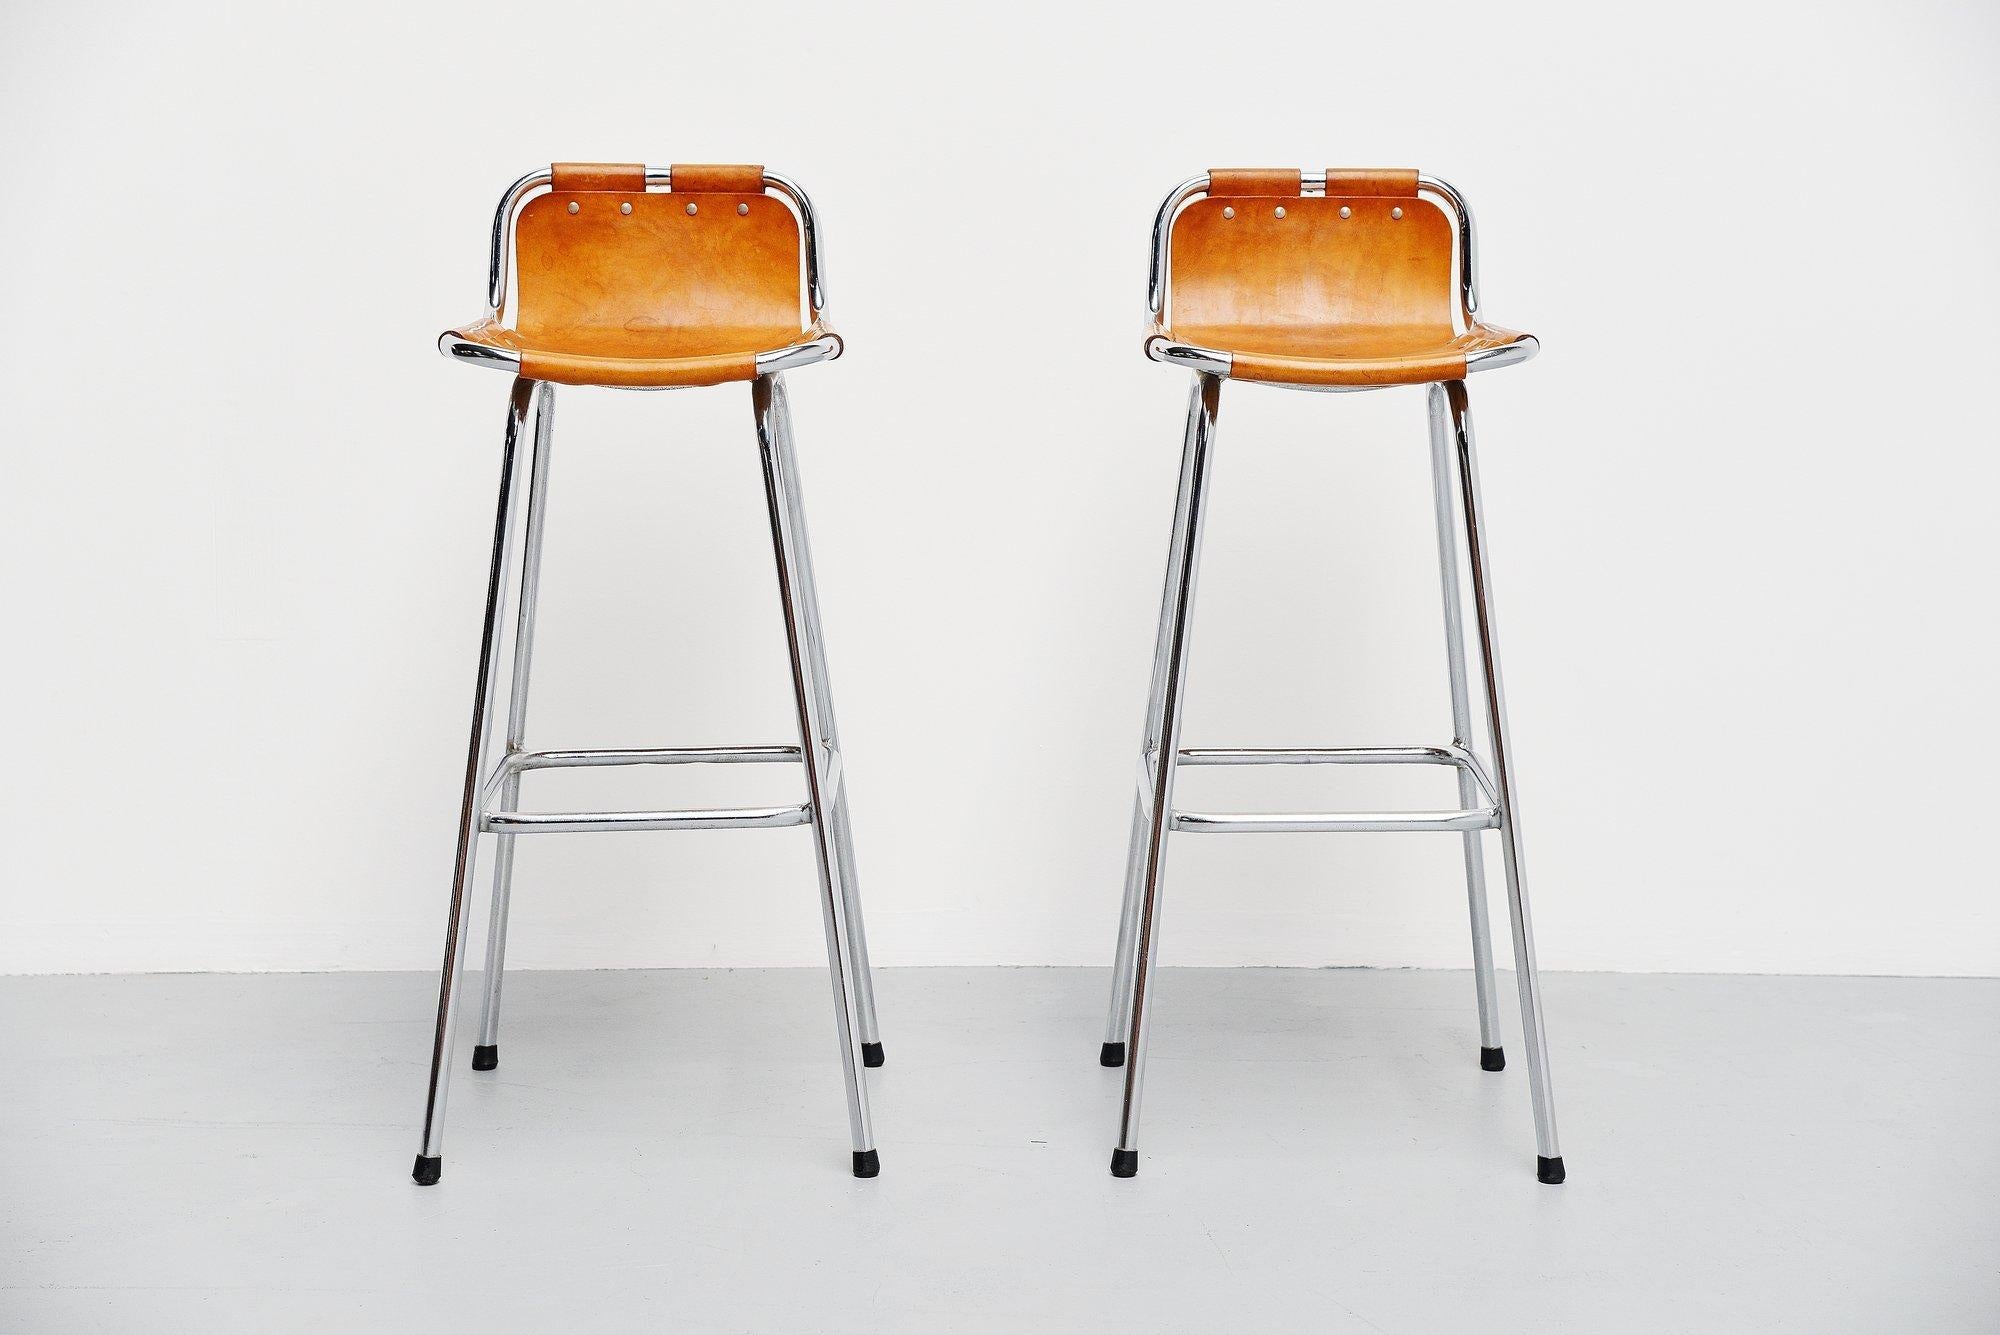 This is for a nice pair of bar stools used by Charlotte Perriand for the ski resort she designed in Les Arcs, France 1960. The stools have a chrome-plated tubular metal frame and natural leather seats. These or for sure one of the nicest stools you